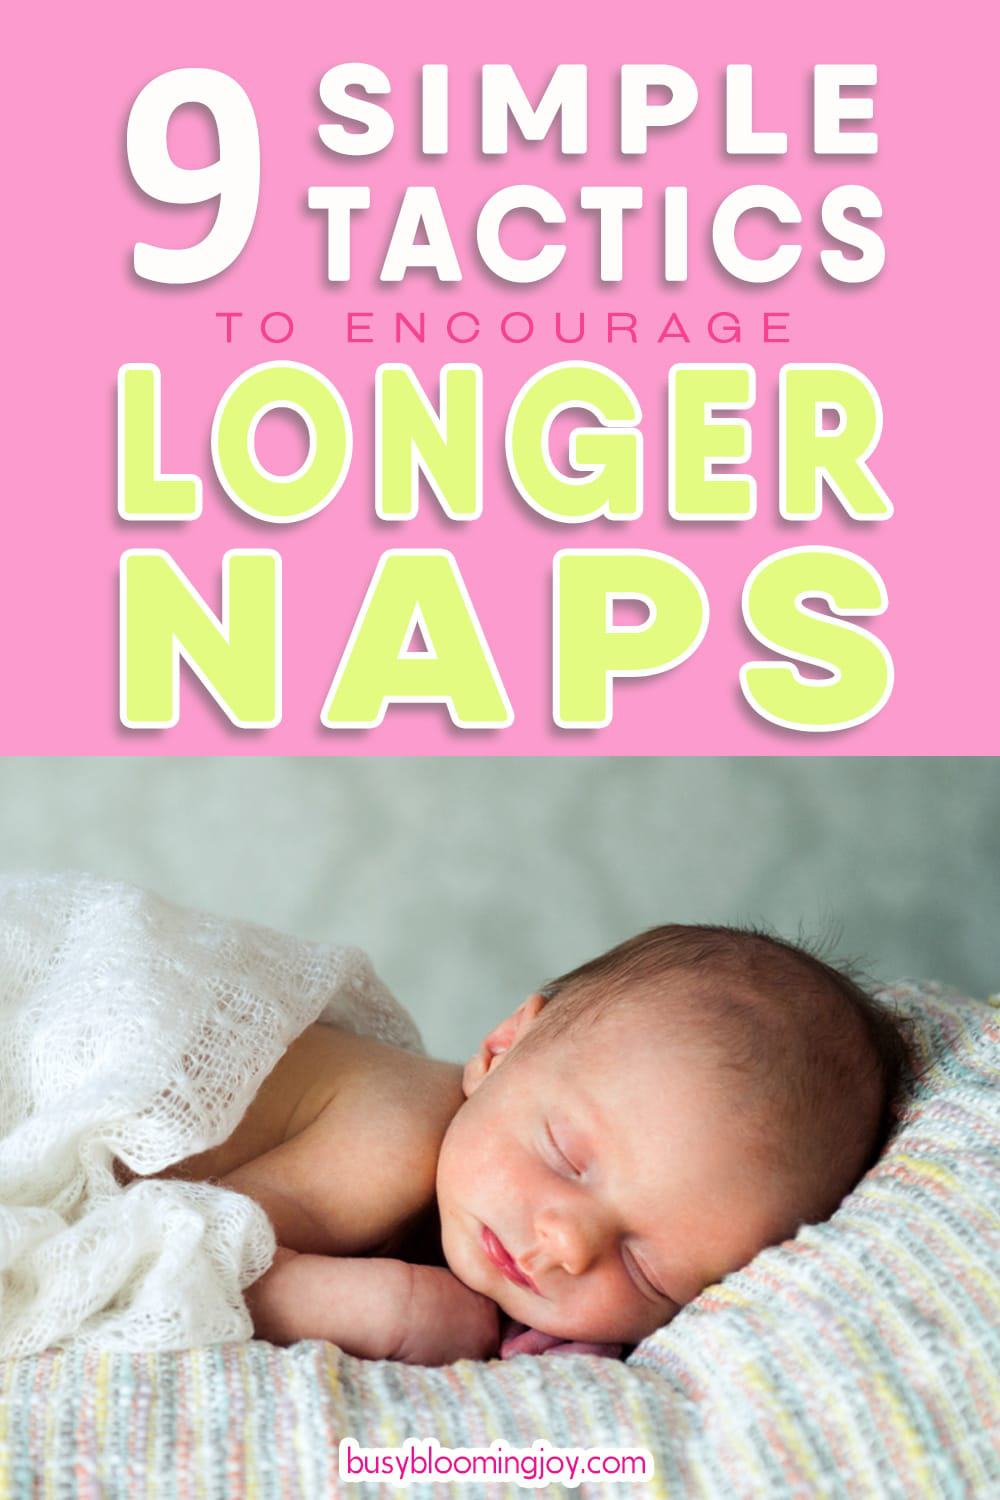 Is your baby a serial short snoozer?! Short naps are no fun for anyone. Baby needs to take a long nap and it’ll change your world mama! You need to know how to encourage longer naps. These are the 9 simple tactics you need to gently nap train your baby. Some great baby sleep tips for longer naps. Say goodbye to short naps and get baby sleeping and napping like a champion. Baby sleep tips| short naps| simple newborn sleep tips